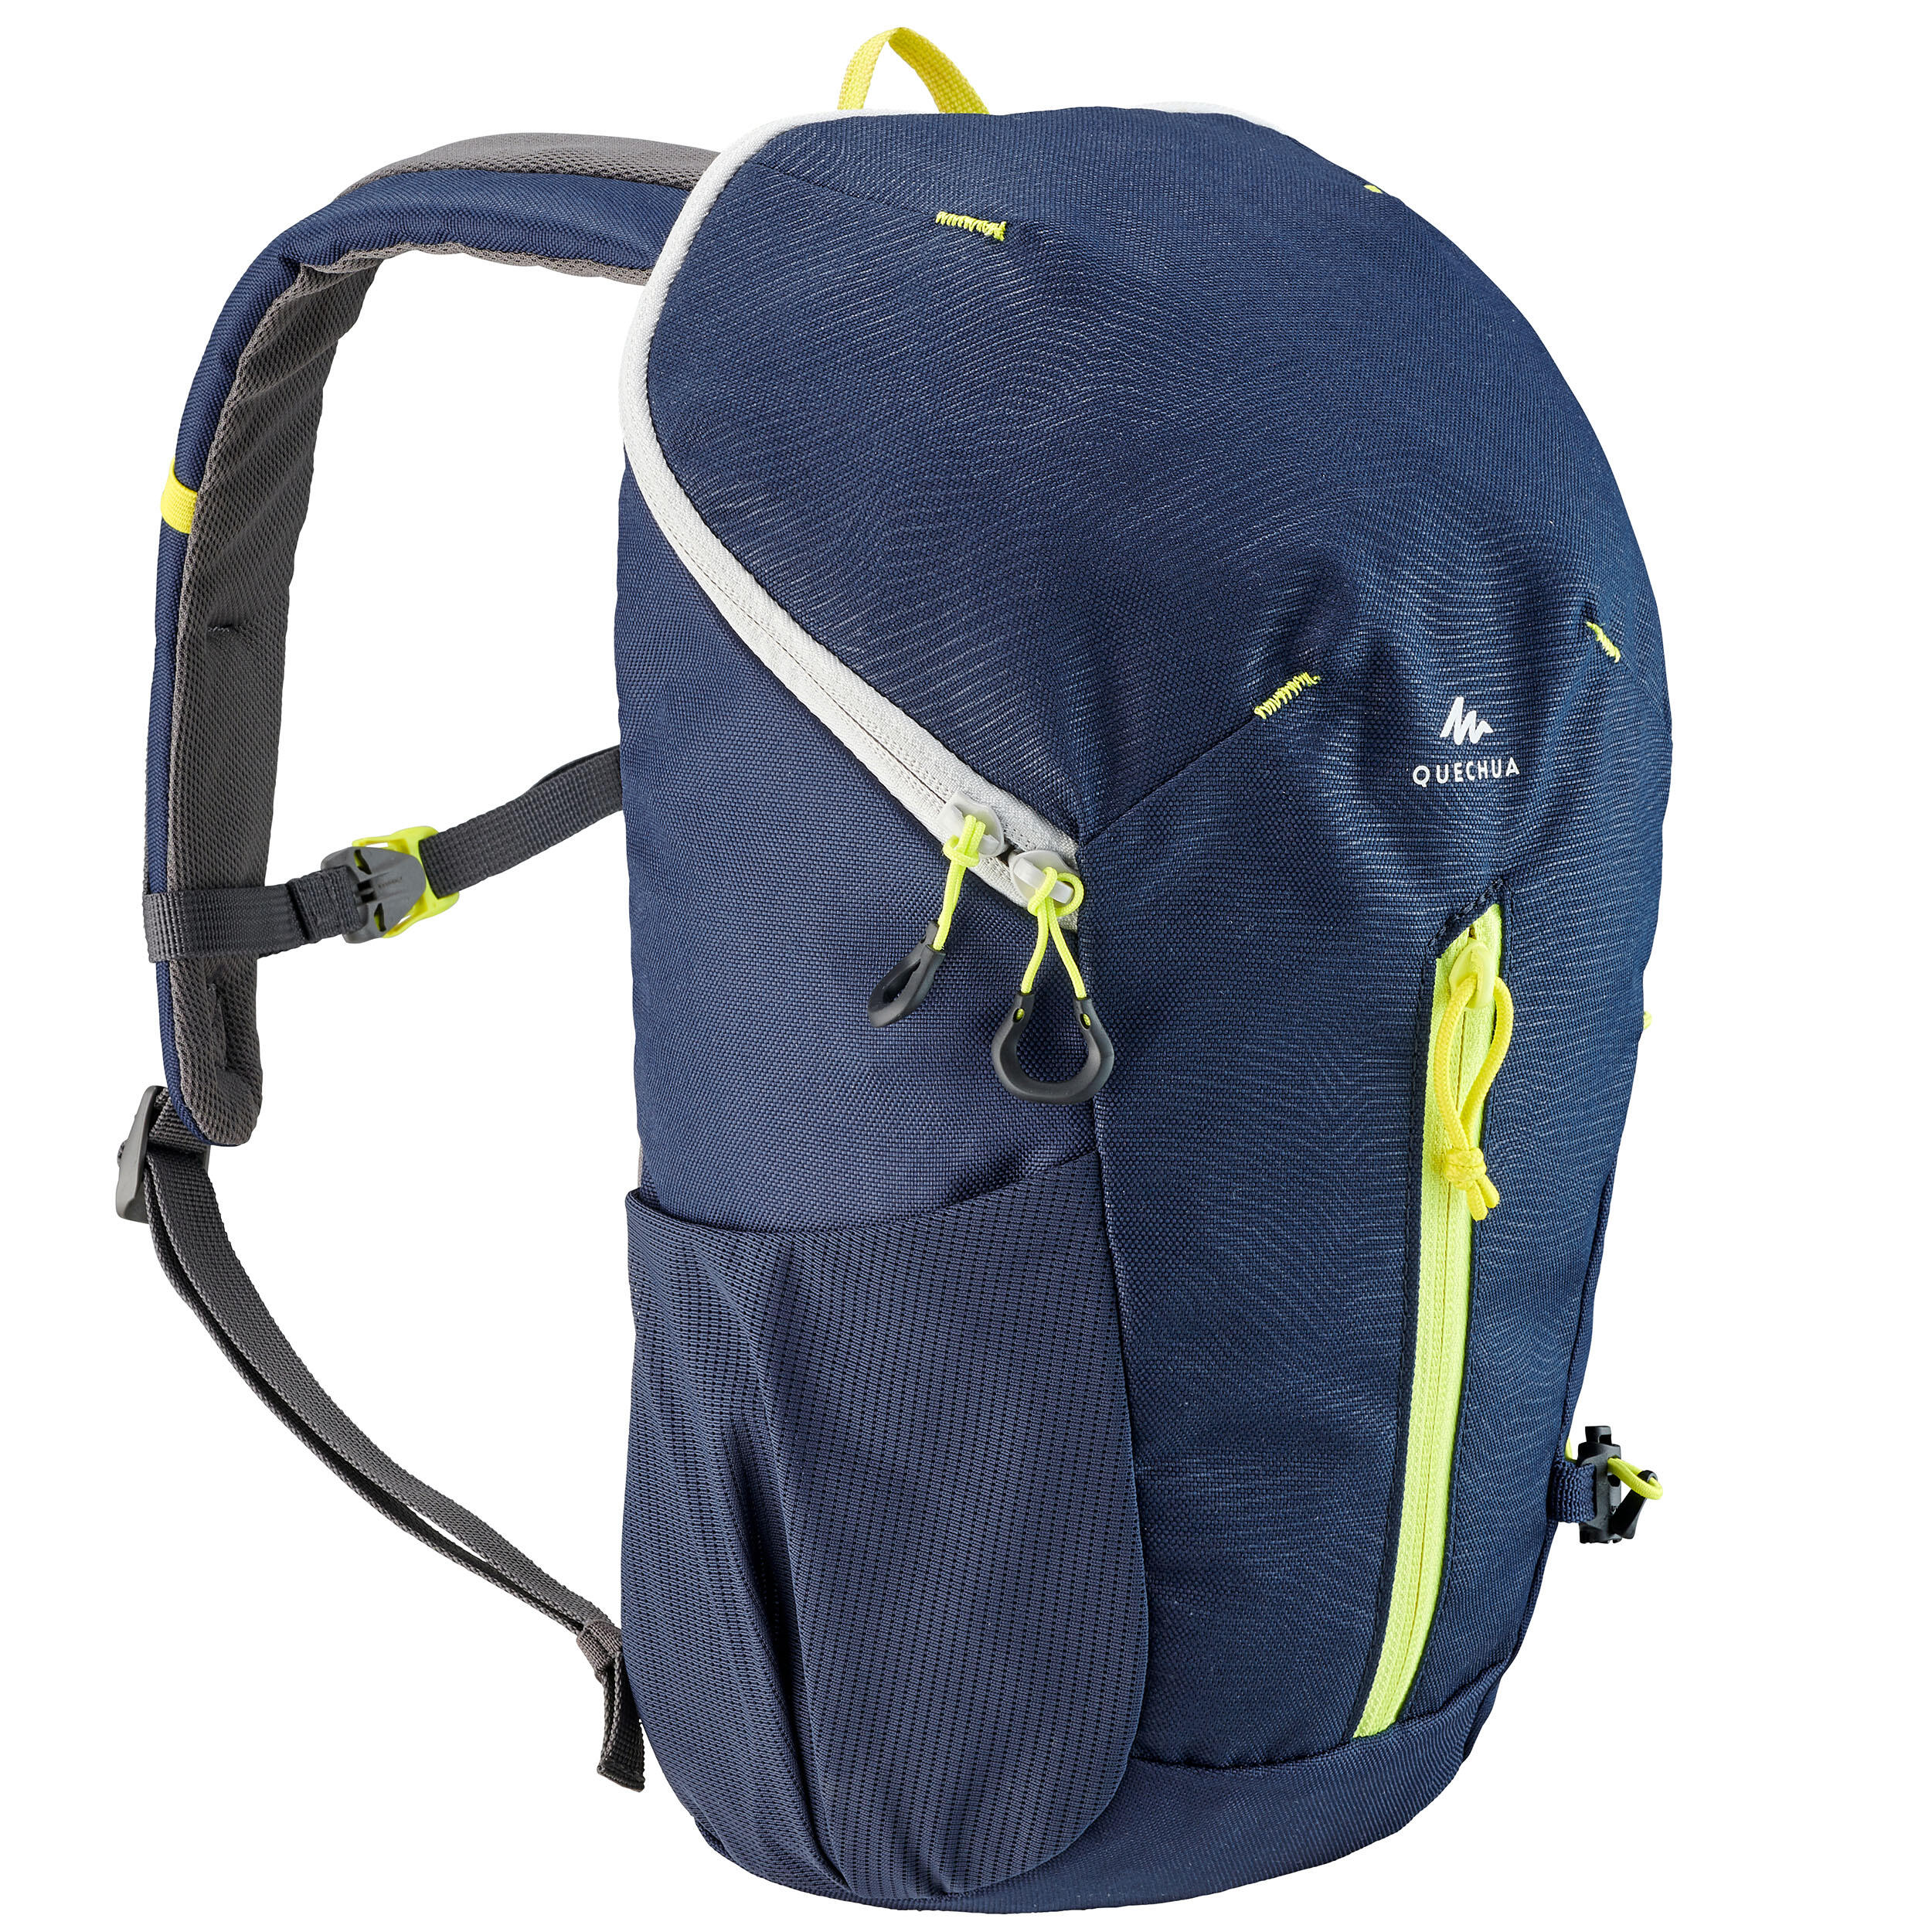 Kids' Hiking Backpack MH100 10 Litres 